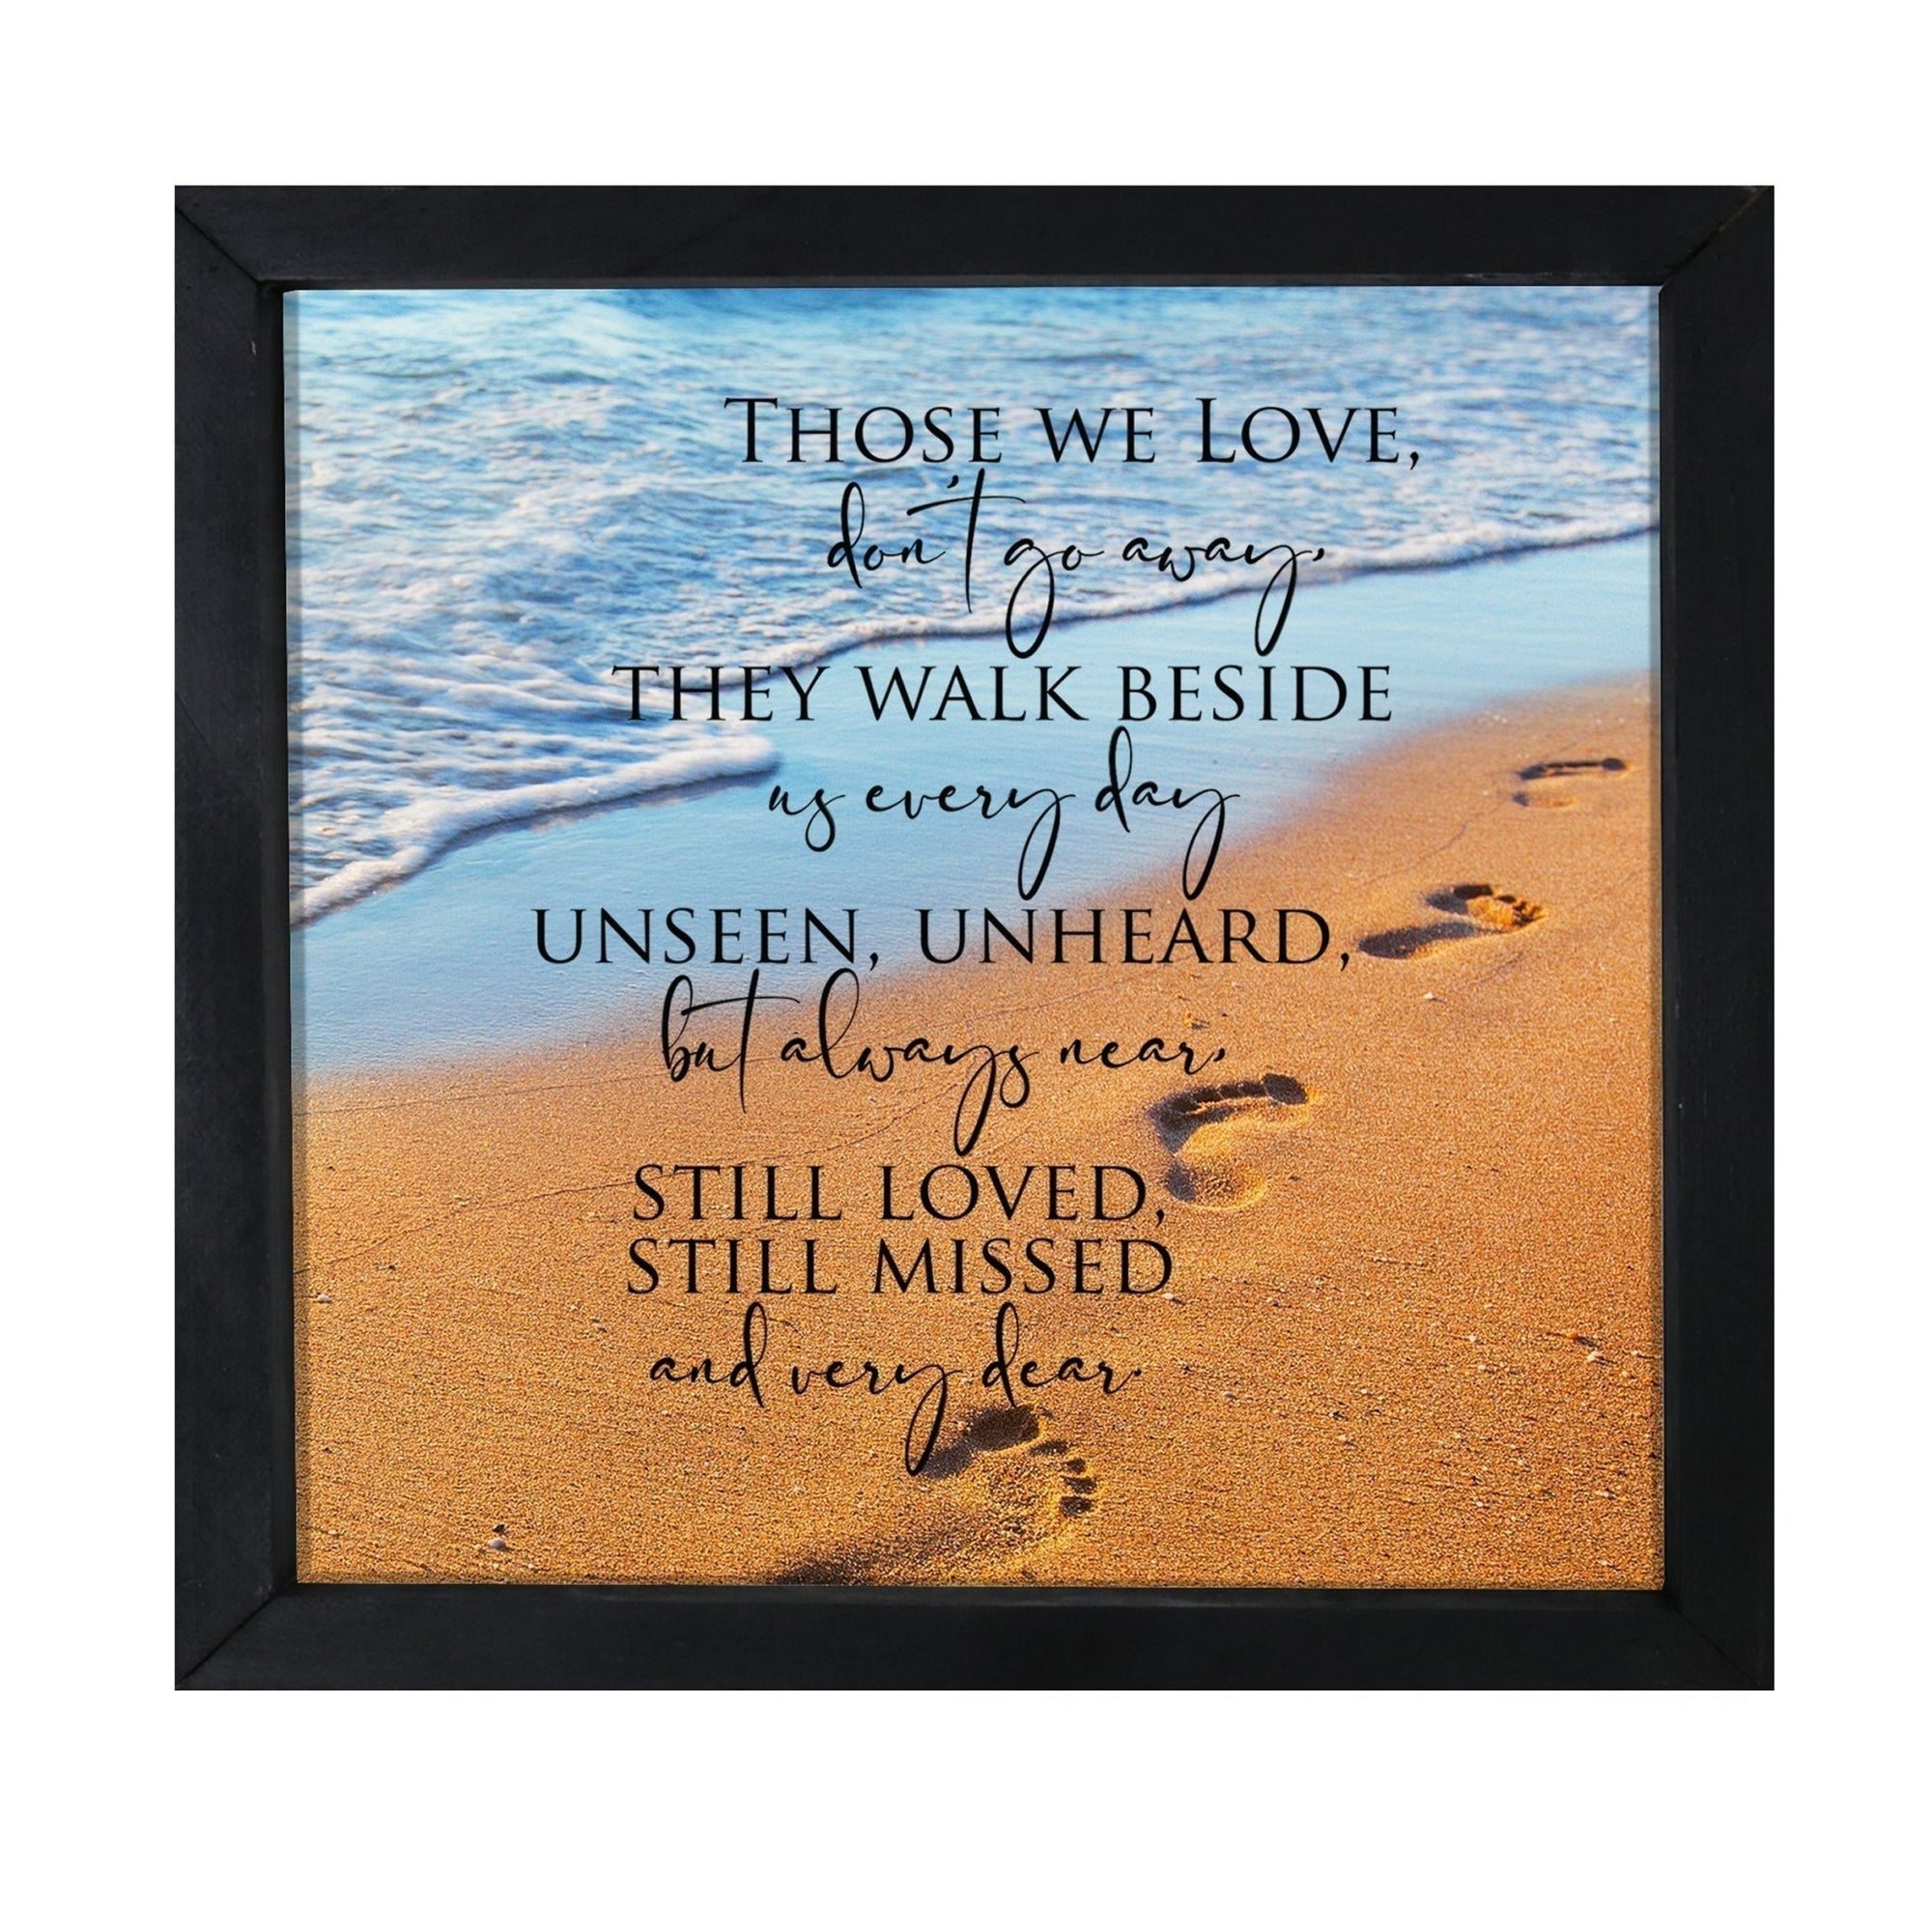 Condolence and sympathy in a thoughtful framed shadow box